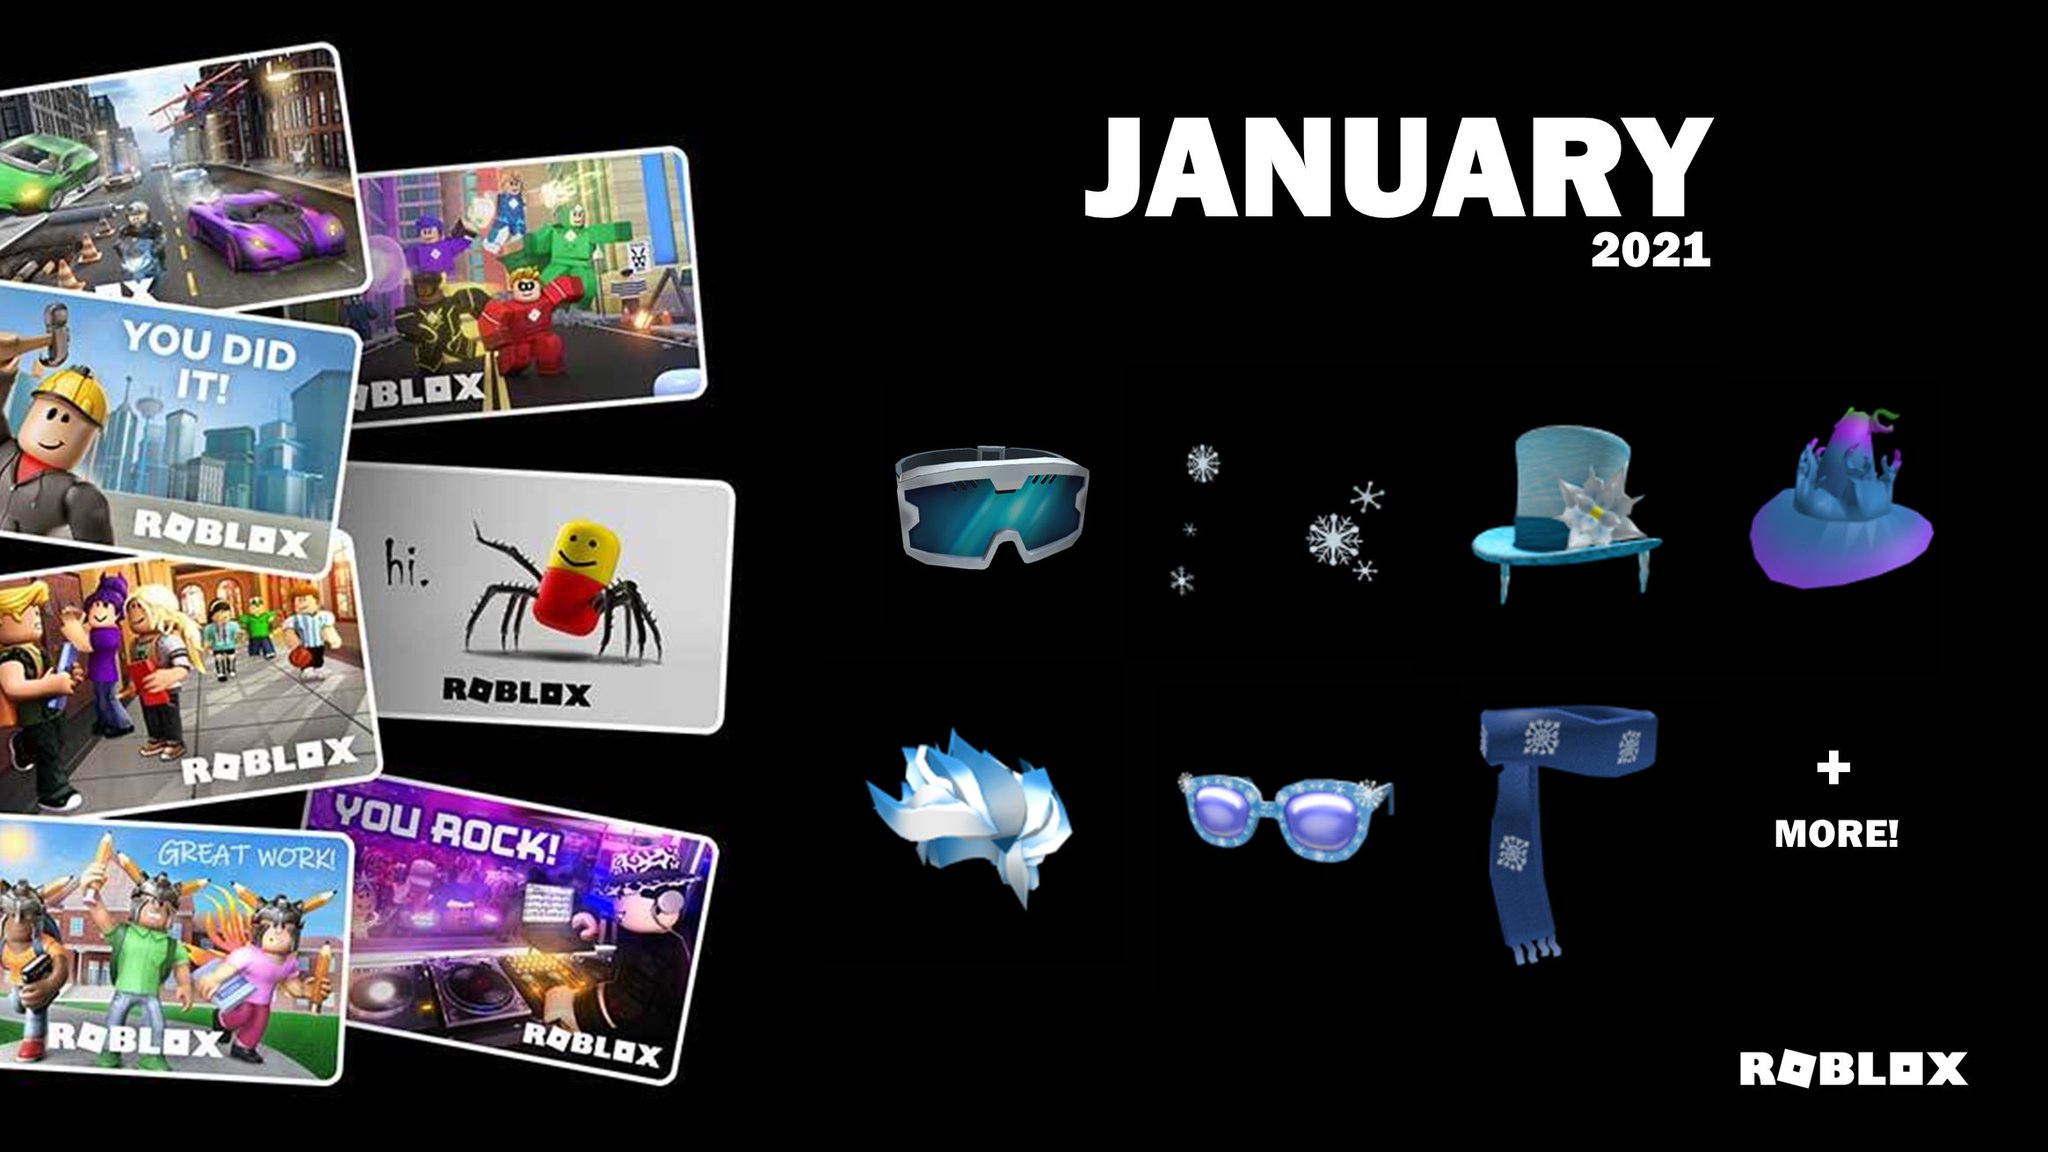 Bloxy News On Twitter The Roblox Gift Card Virtual Items And Their Corresponding Stores For January 2021 Are Now Available Check Them Out Here Https T Co Pujwqlz5yt Purchase A Gift Card - roblox gift card at target